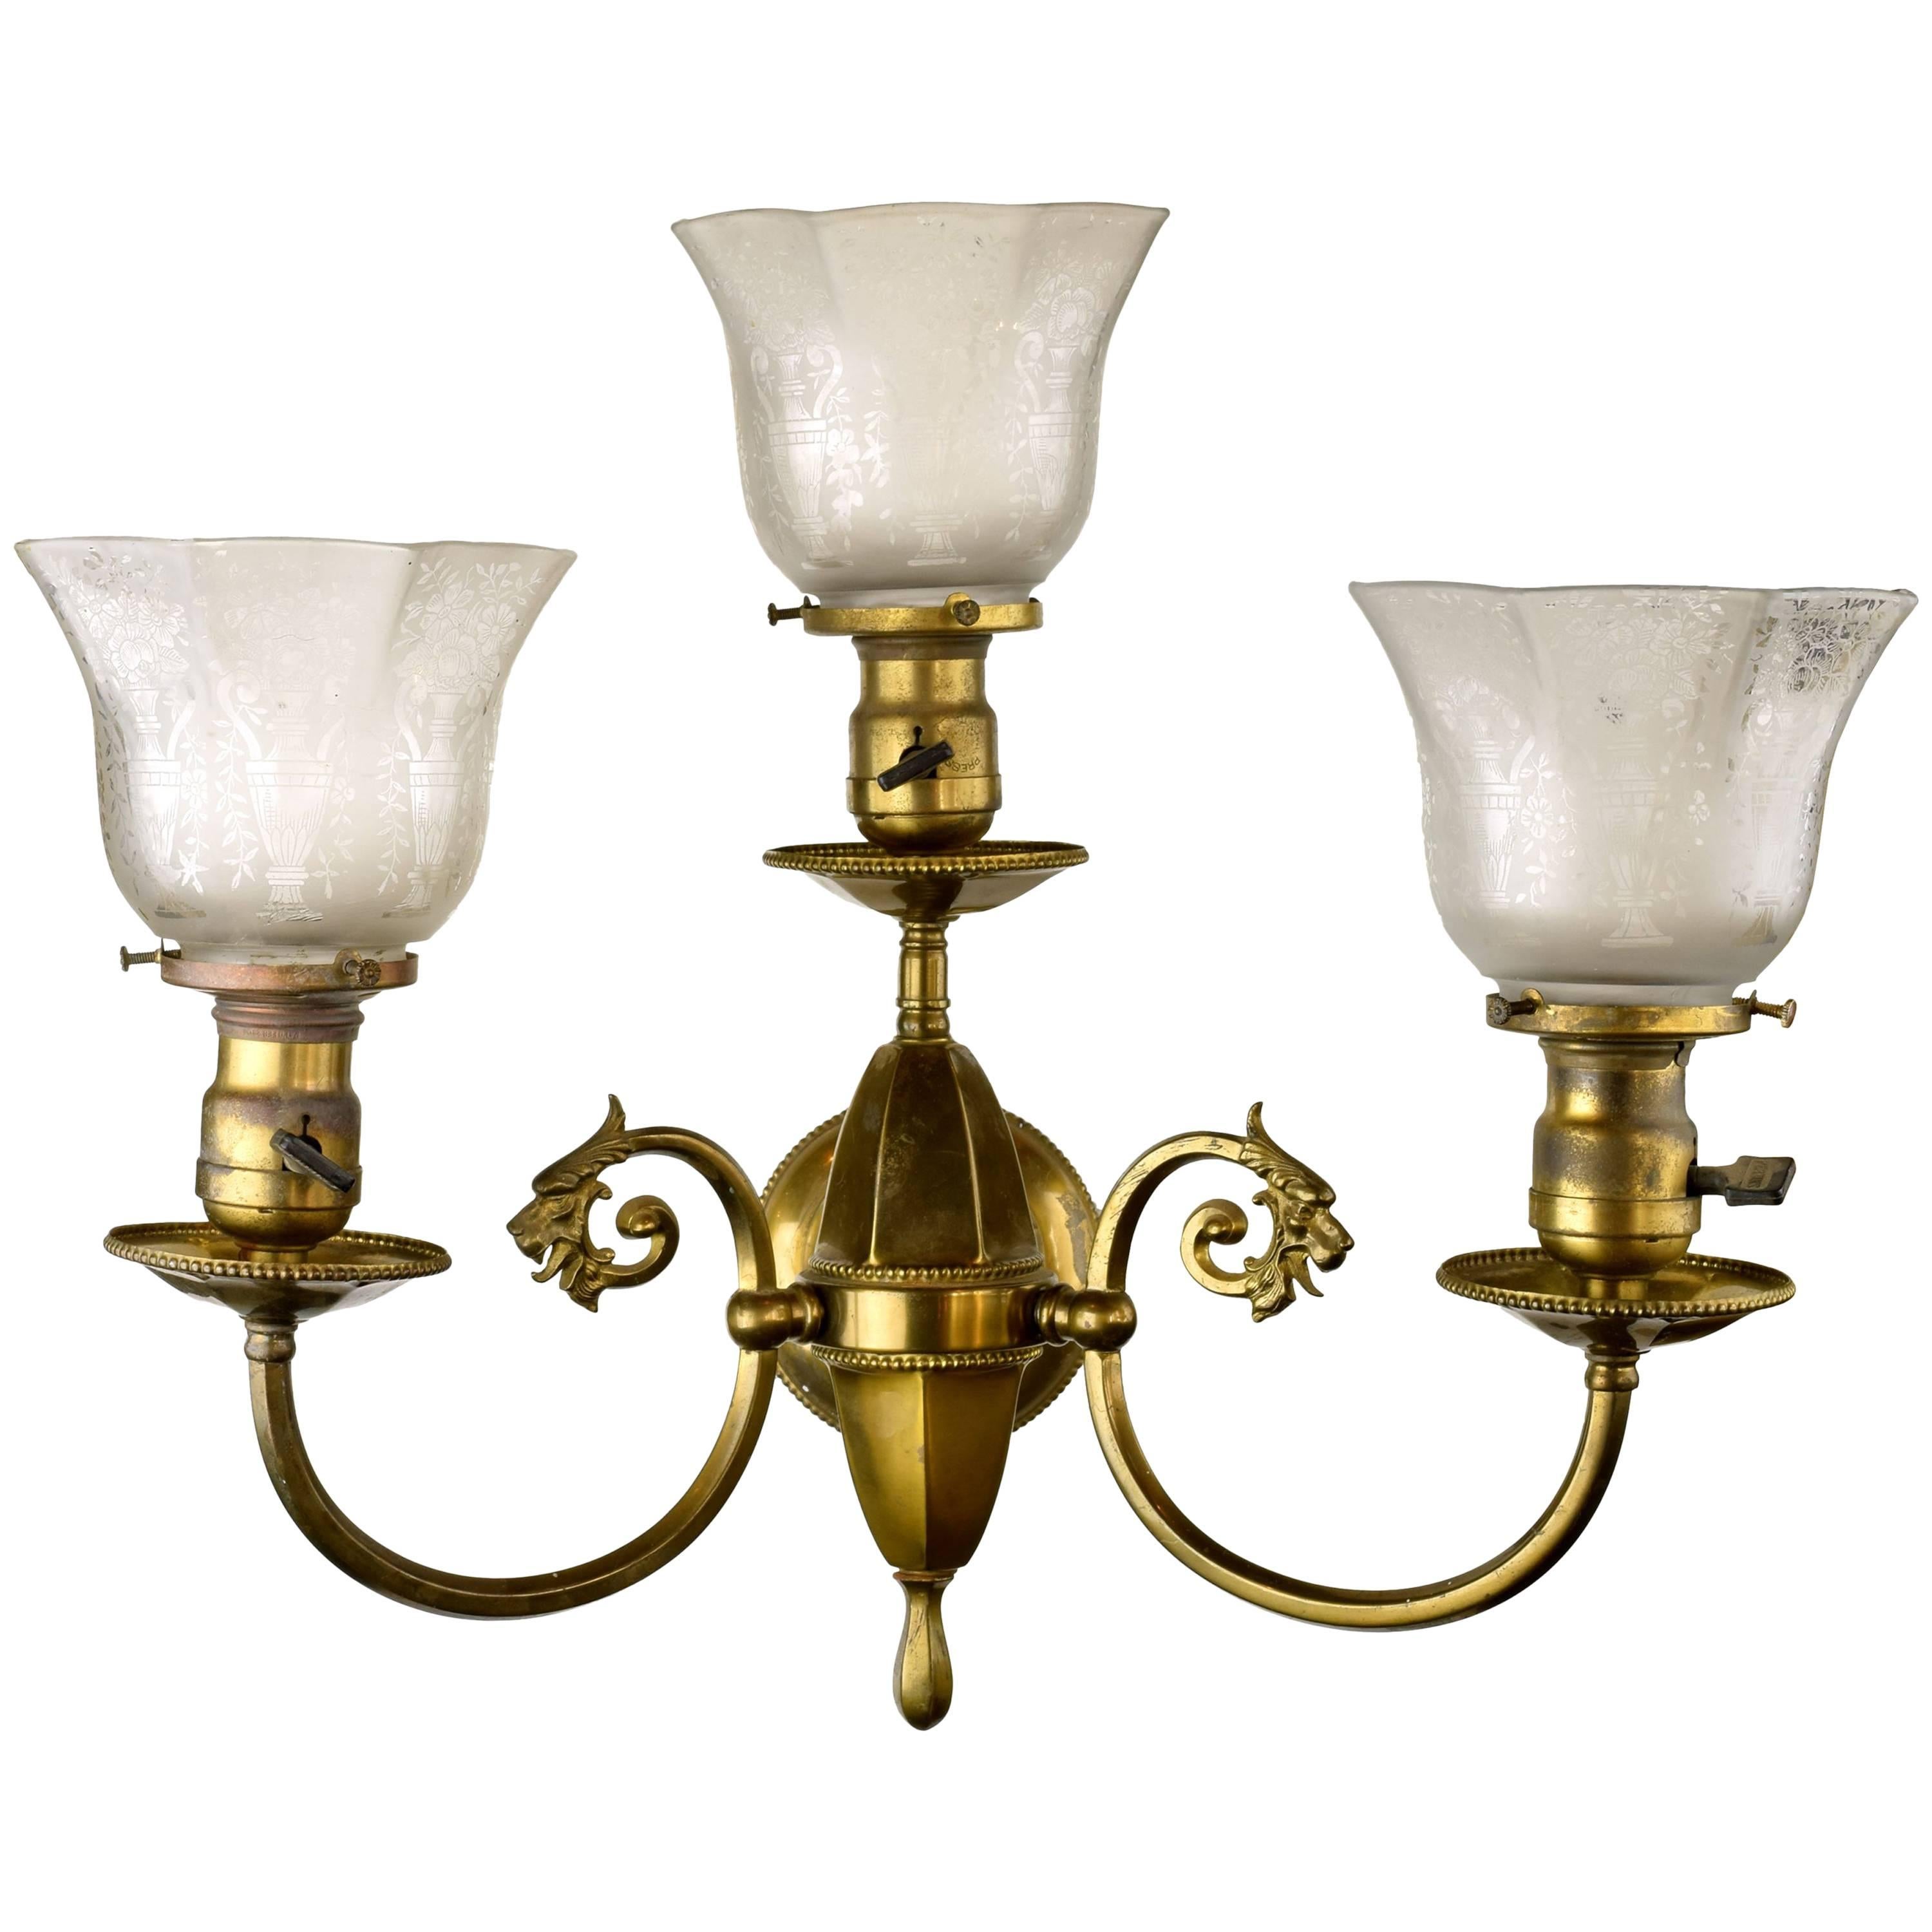 Beardslee Griffin Three-Arm Brass Sconce with shades